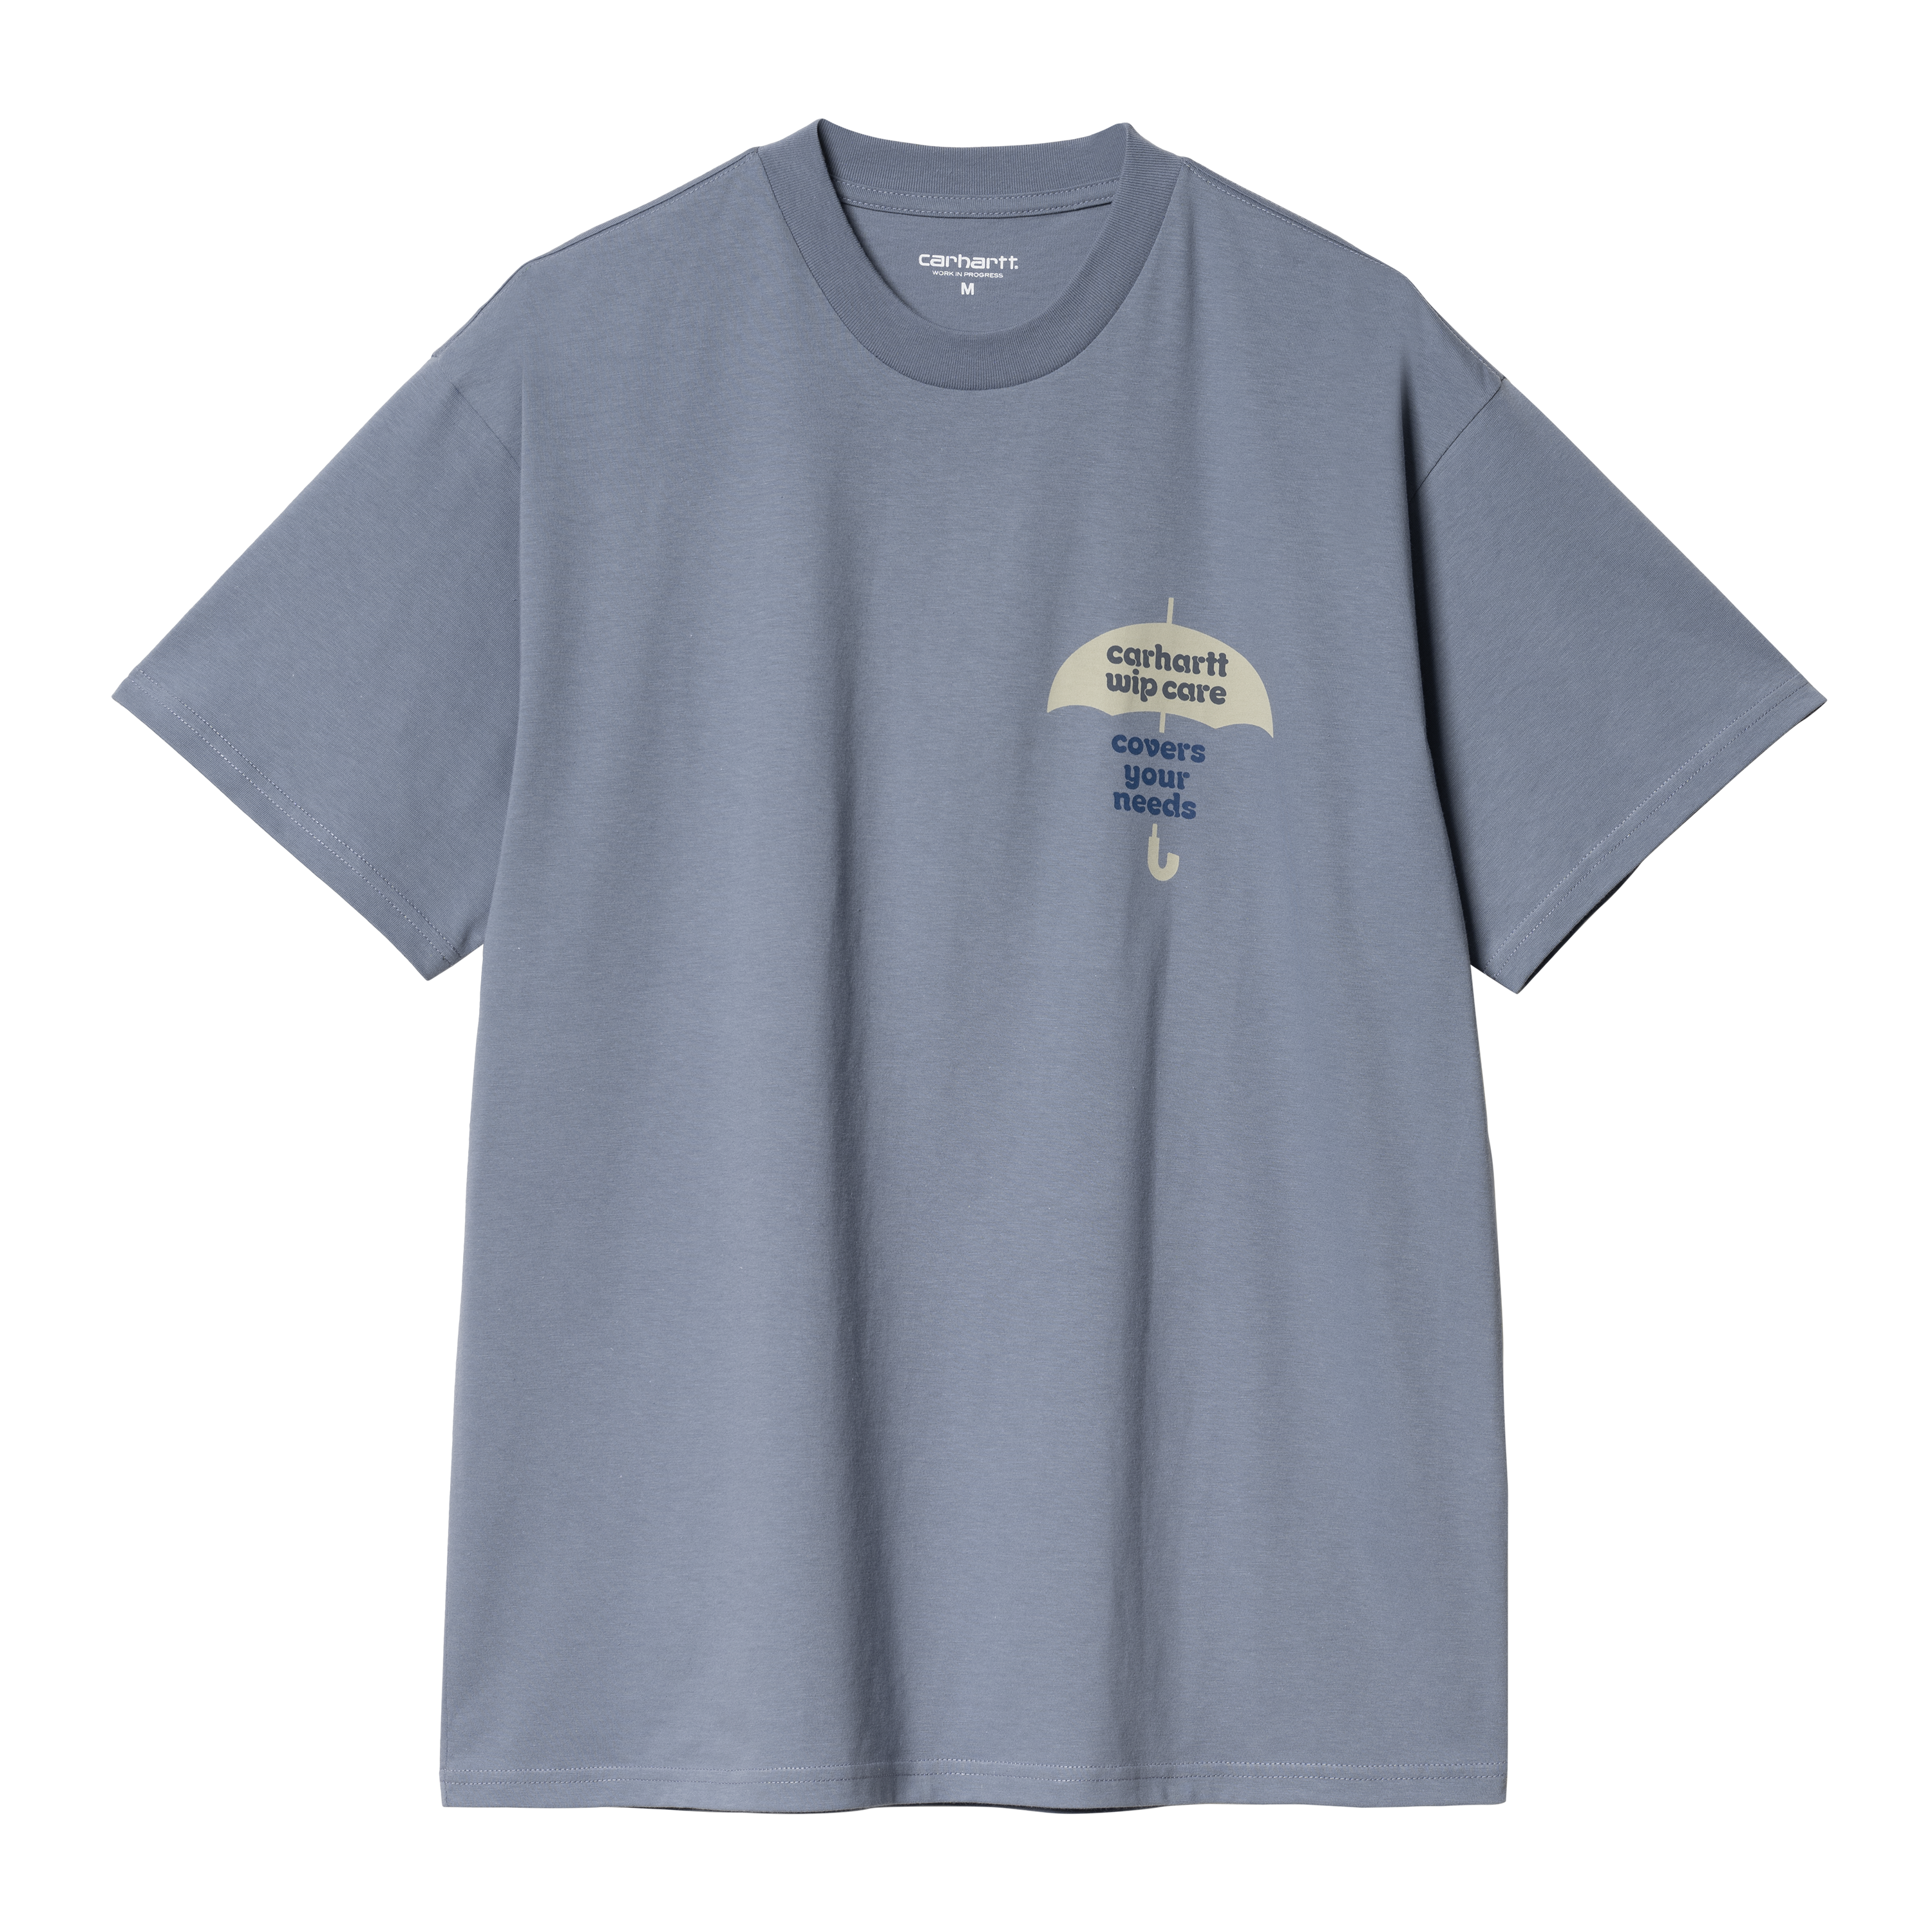 Carhartt WIP Short Sleeve Covers T-Shirt in Blue